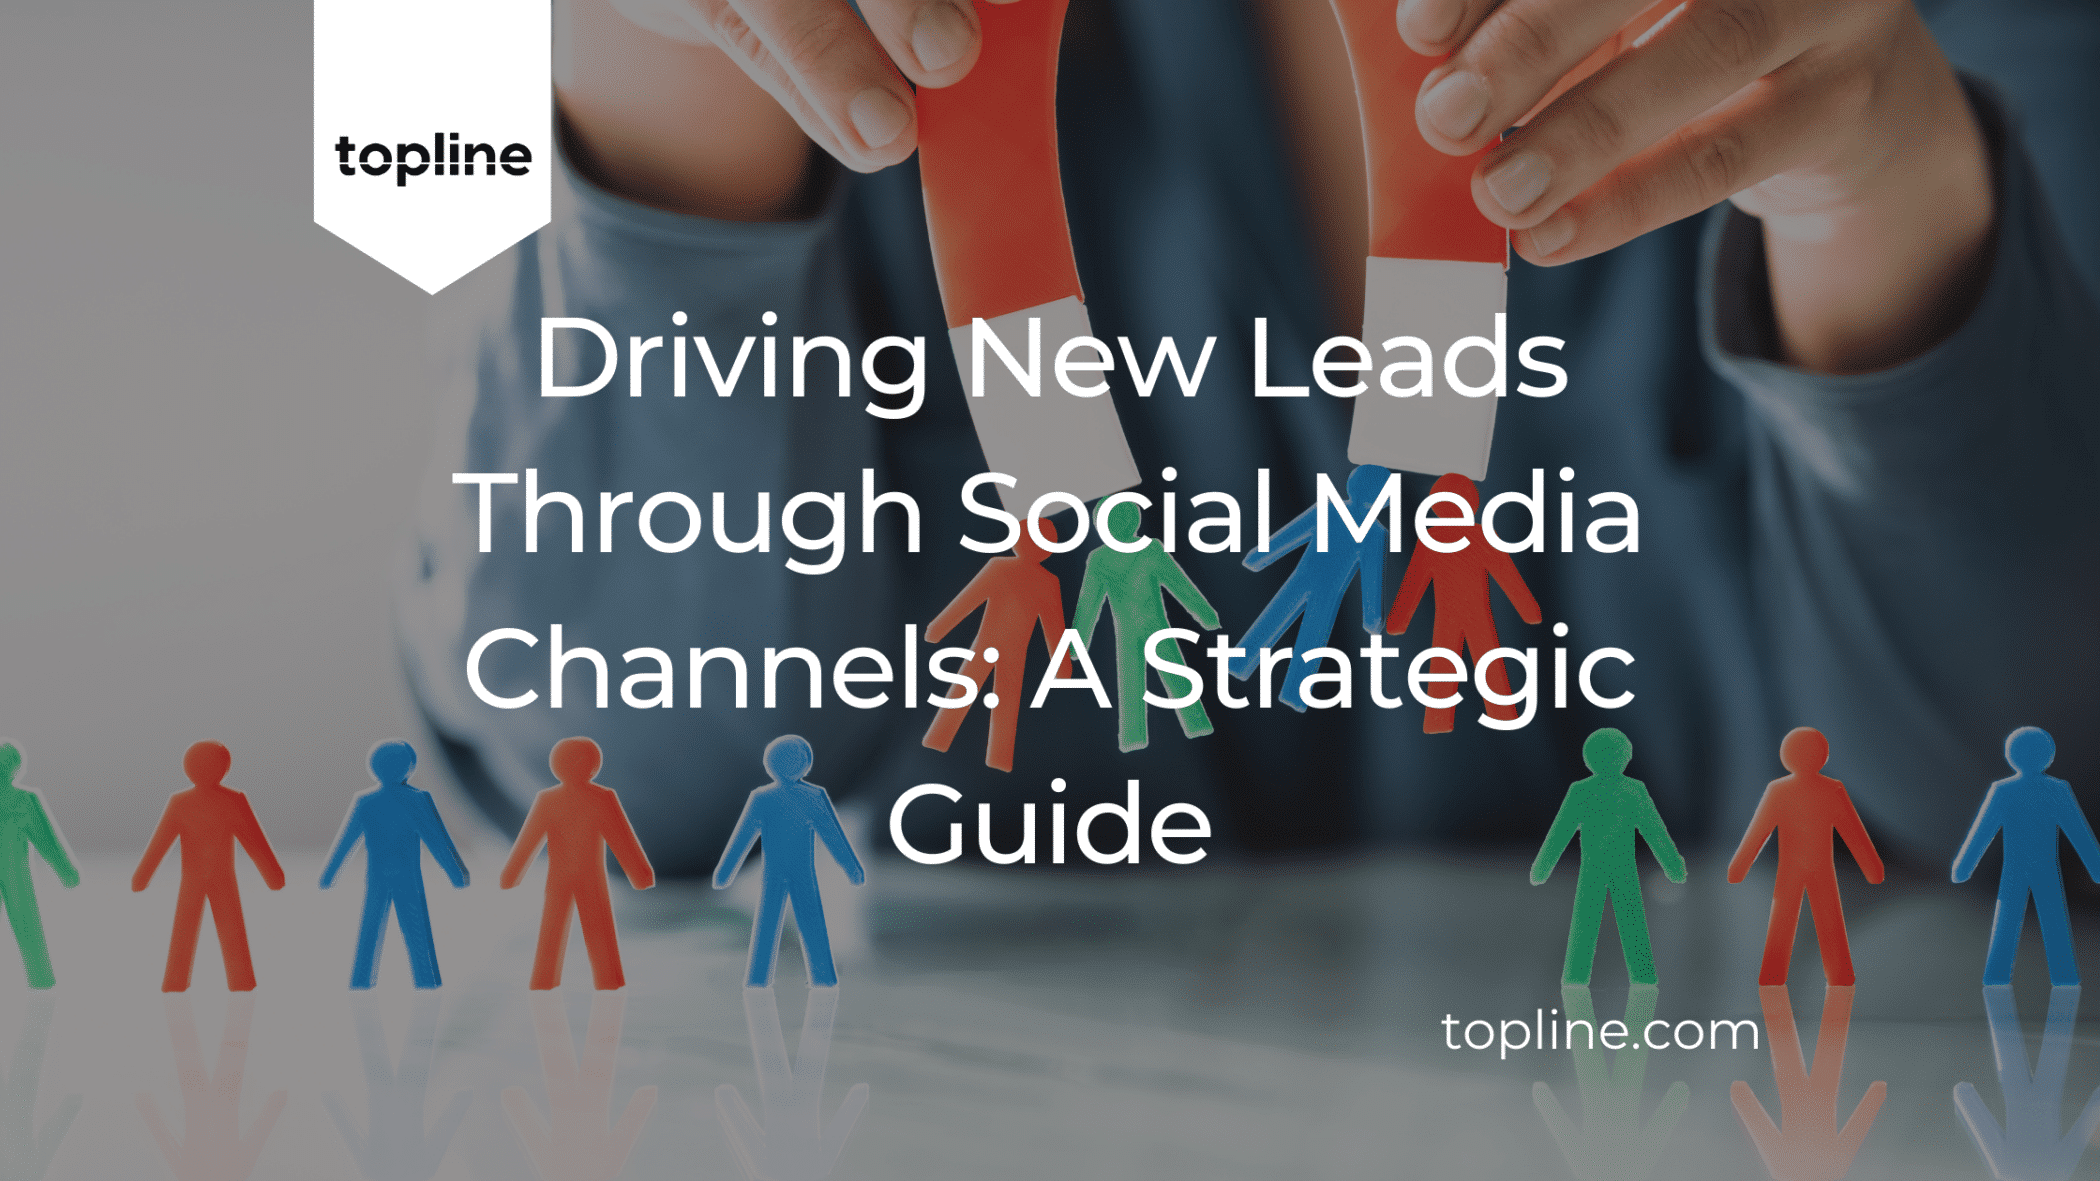 Driving New Leads Through Social Media Channels: A Strategic Guide